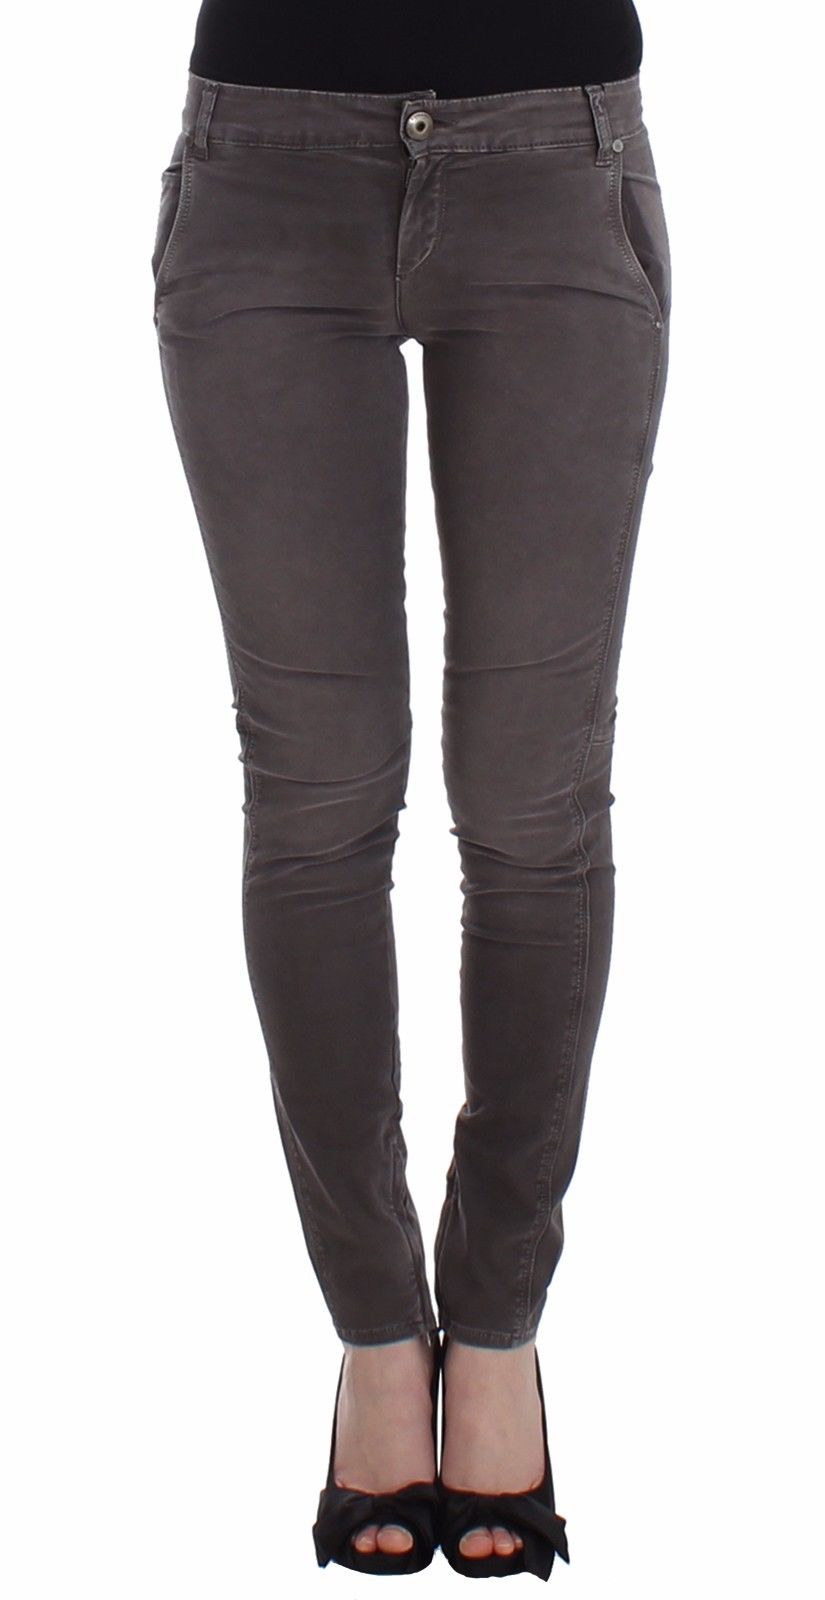 Gray Slim Jeans Denim Pants Skinny Leg Stretch - Designed by Ermanno Scervino Available to Buy at a Discounted Price on Moon Behind The Hill Online Designer Discount Store